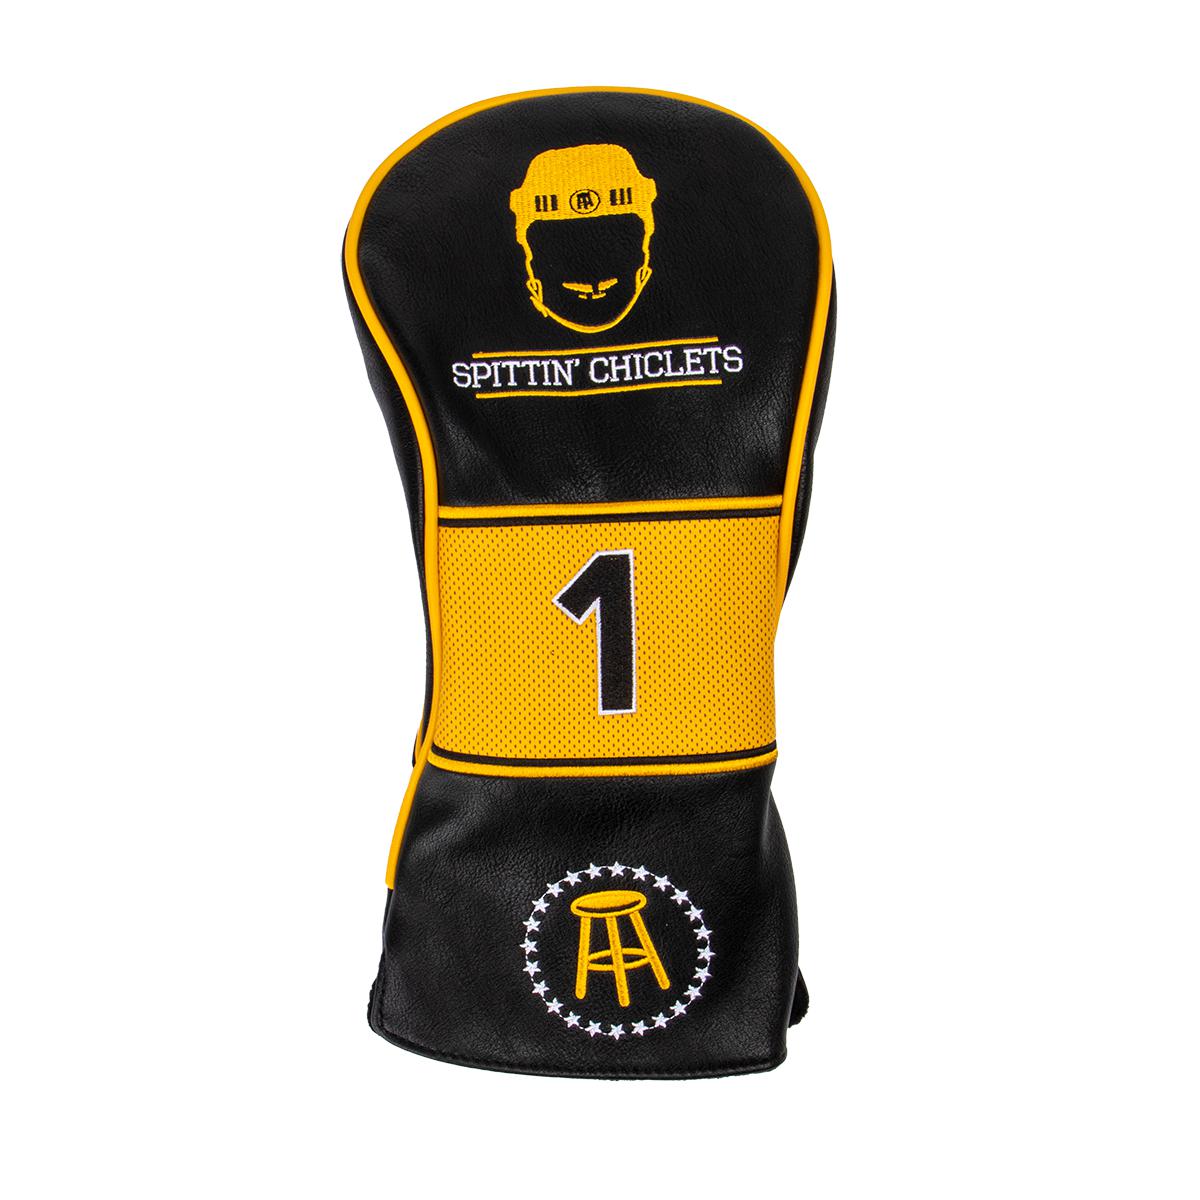 Spittin Chiclets Driver Headcover-Golf Accessories-Spittin Chiclets-Black-One Size-Barstool Sports